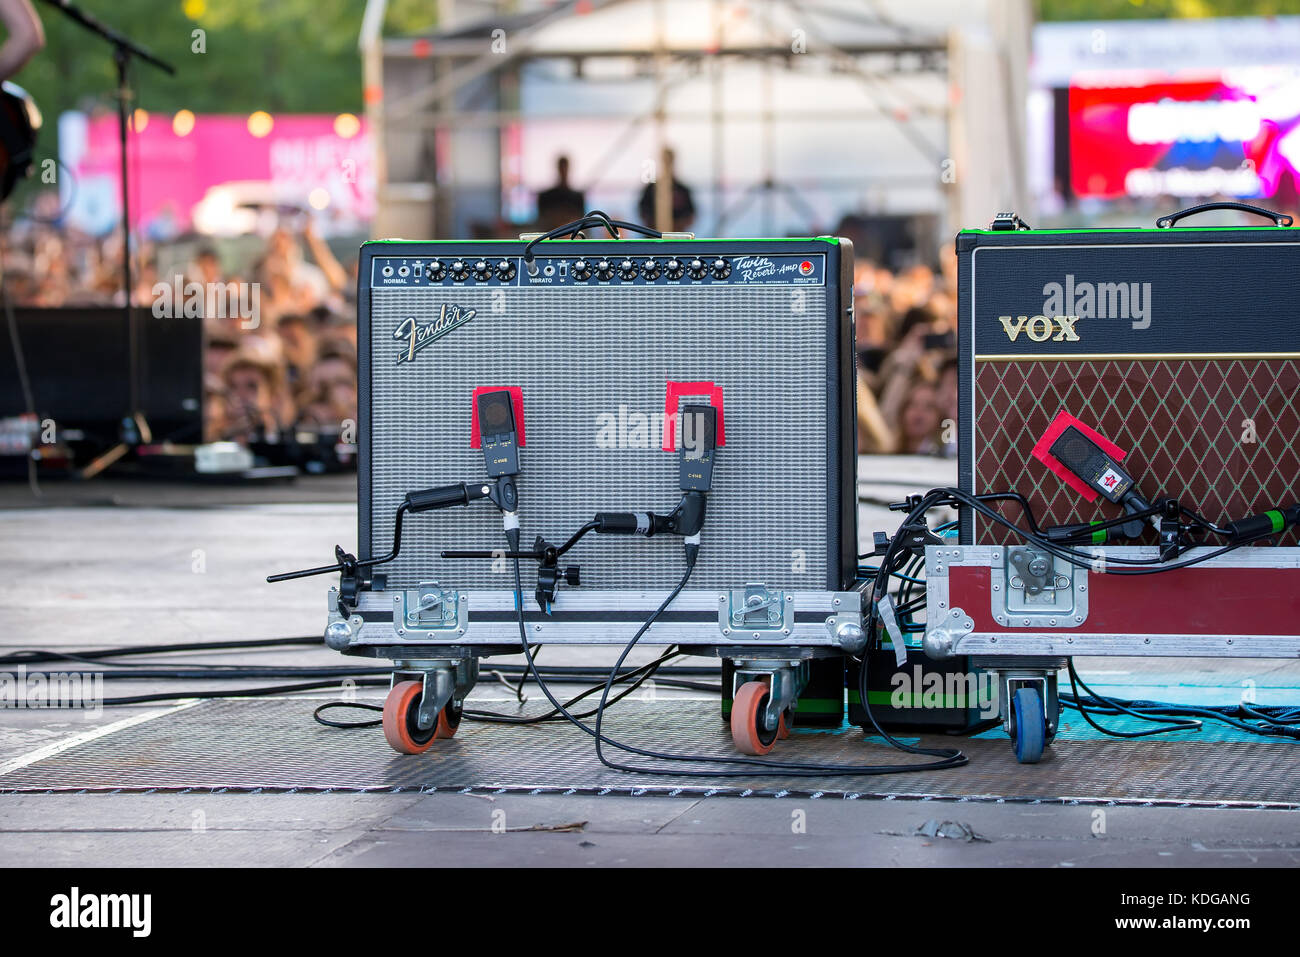 MADRID - SEP 9: Fender and Vox guitar amplifiers on stage at Dcode Music Festival on September 9, 2017 in Madrid, Spain. Stock Photo